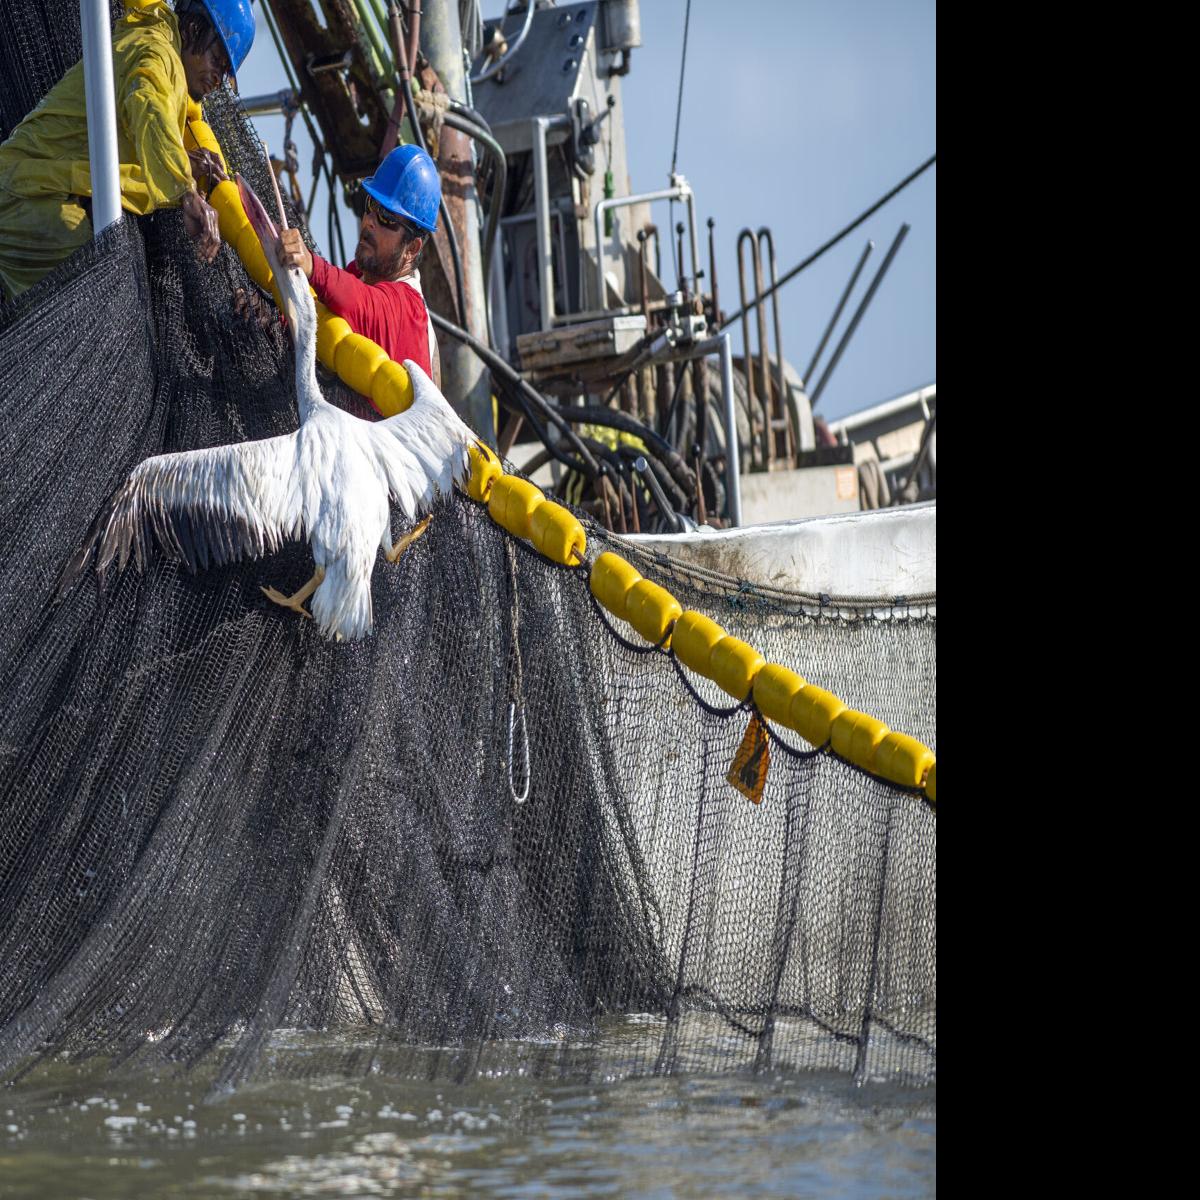 They're taking everything': Banned in other states, pogy ships catch all  they want in Louisiana, Environment, boat fishing net 